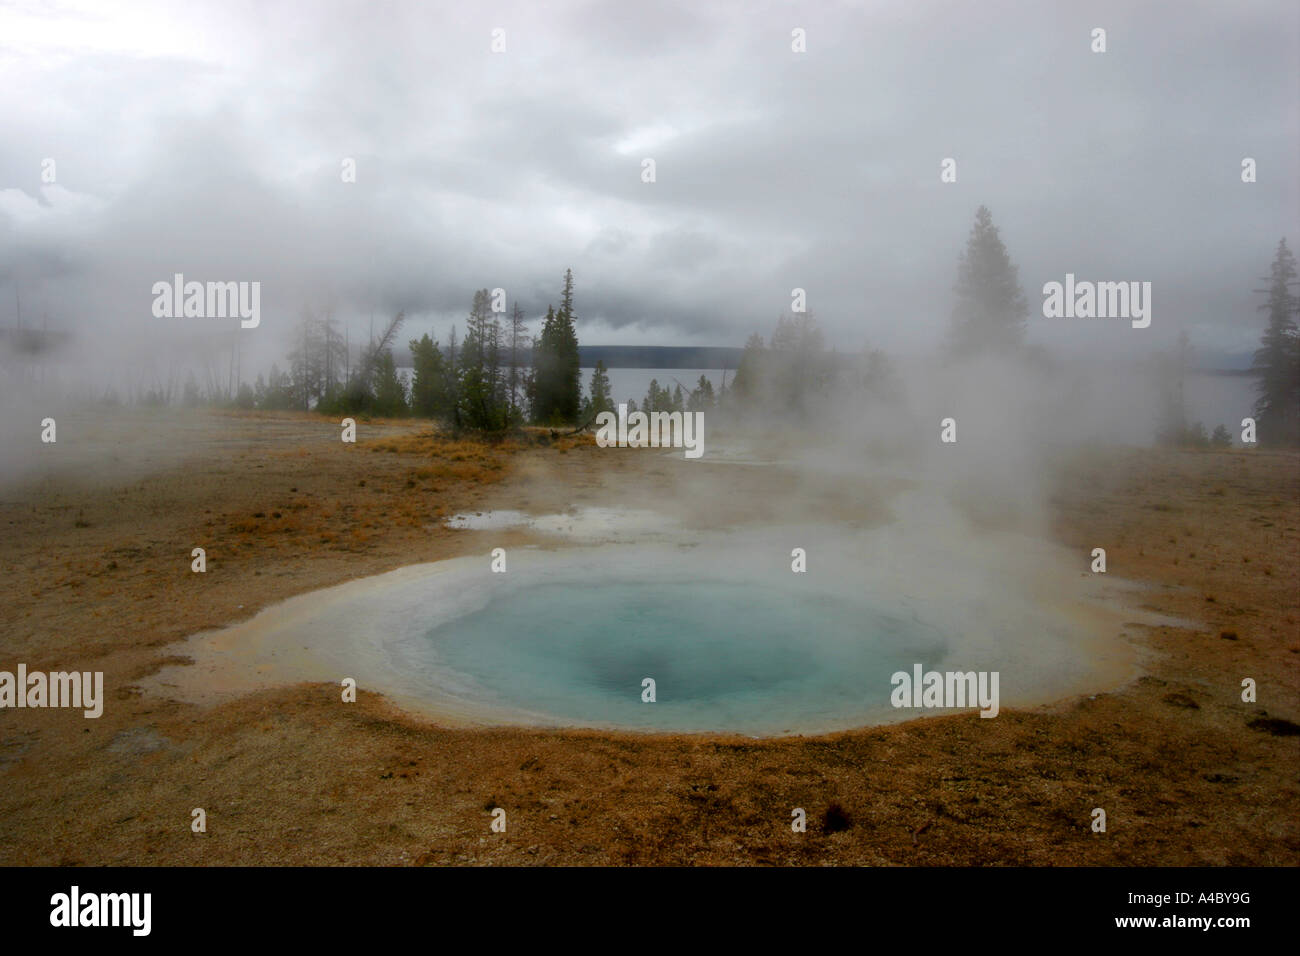 West Thumb geyser Basin, parc national de Yellowstone, Wyoming Banque D'Images